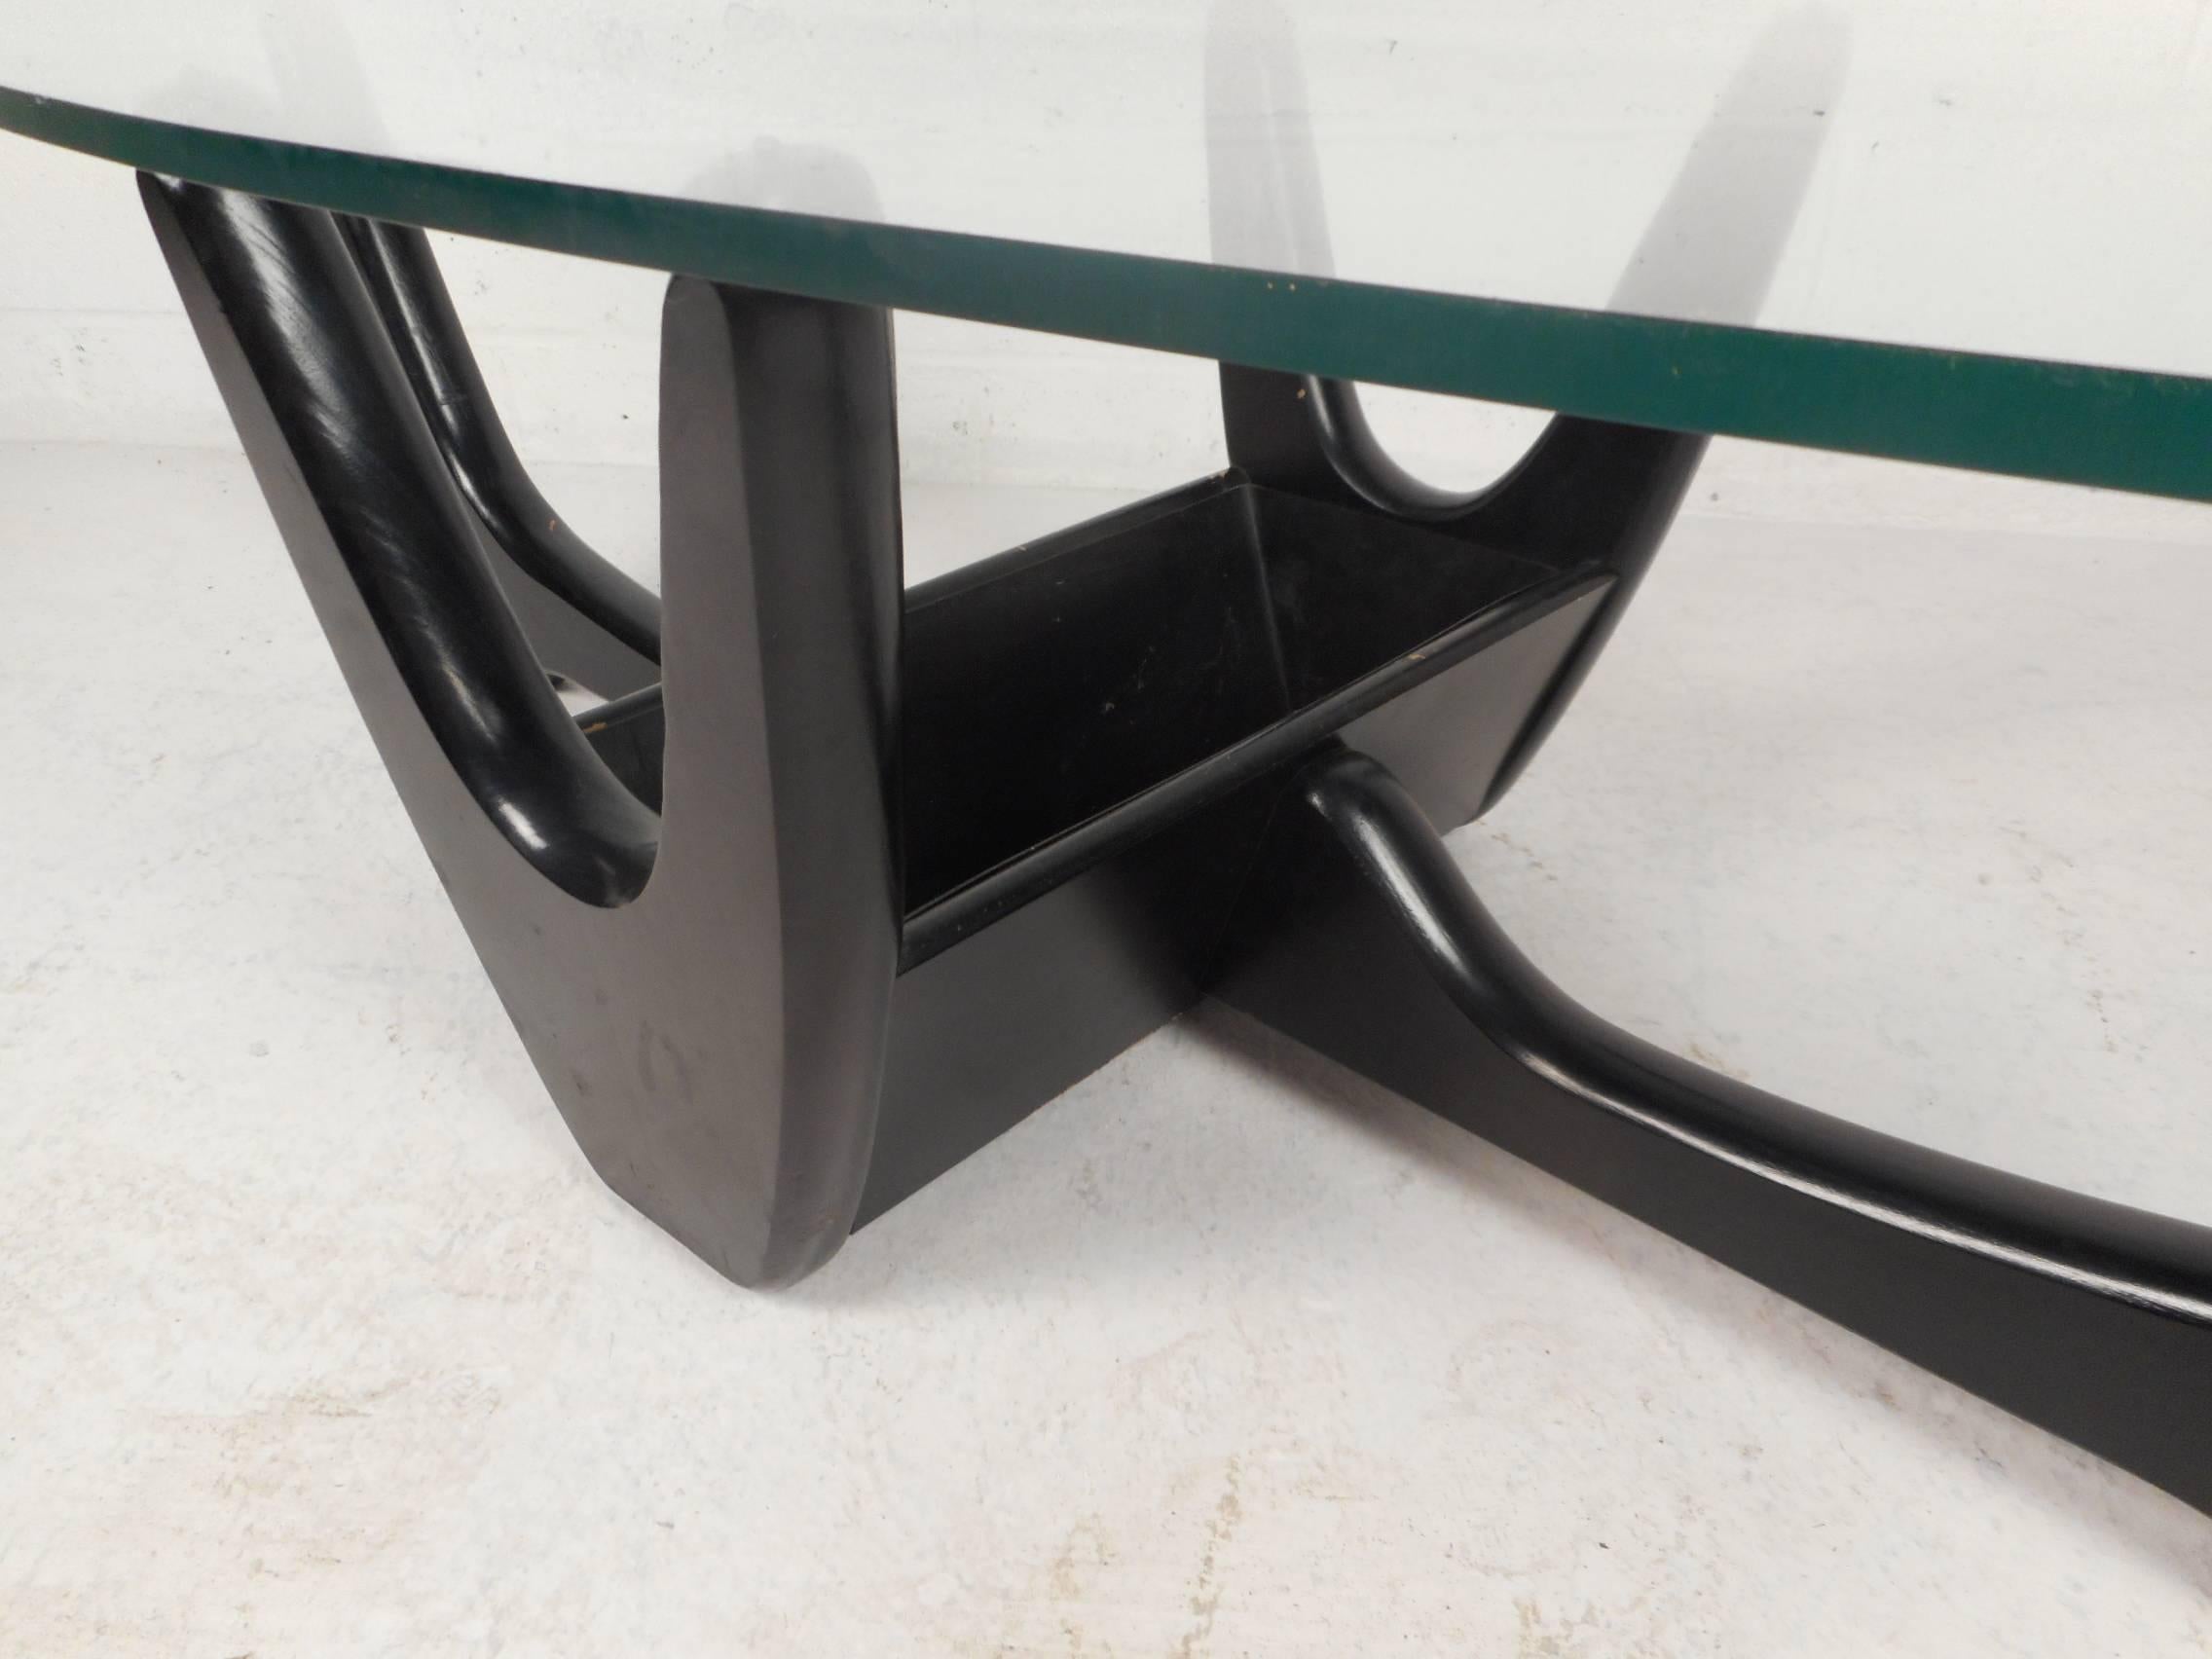 North American Set of Mid-Century Modern Glass Top Tables by Tonk Manufacturing Co. 